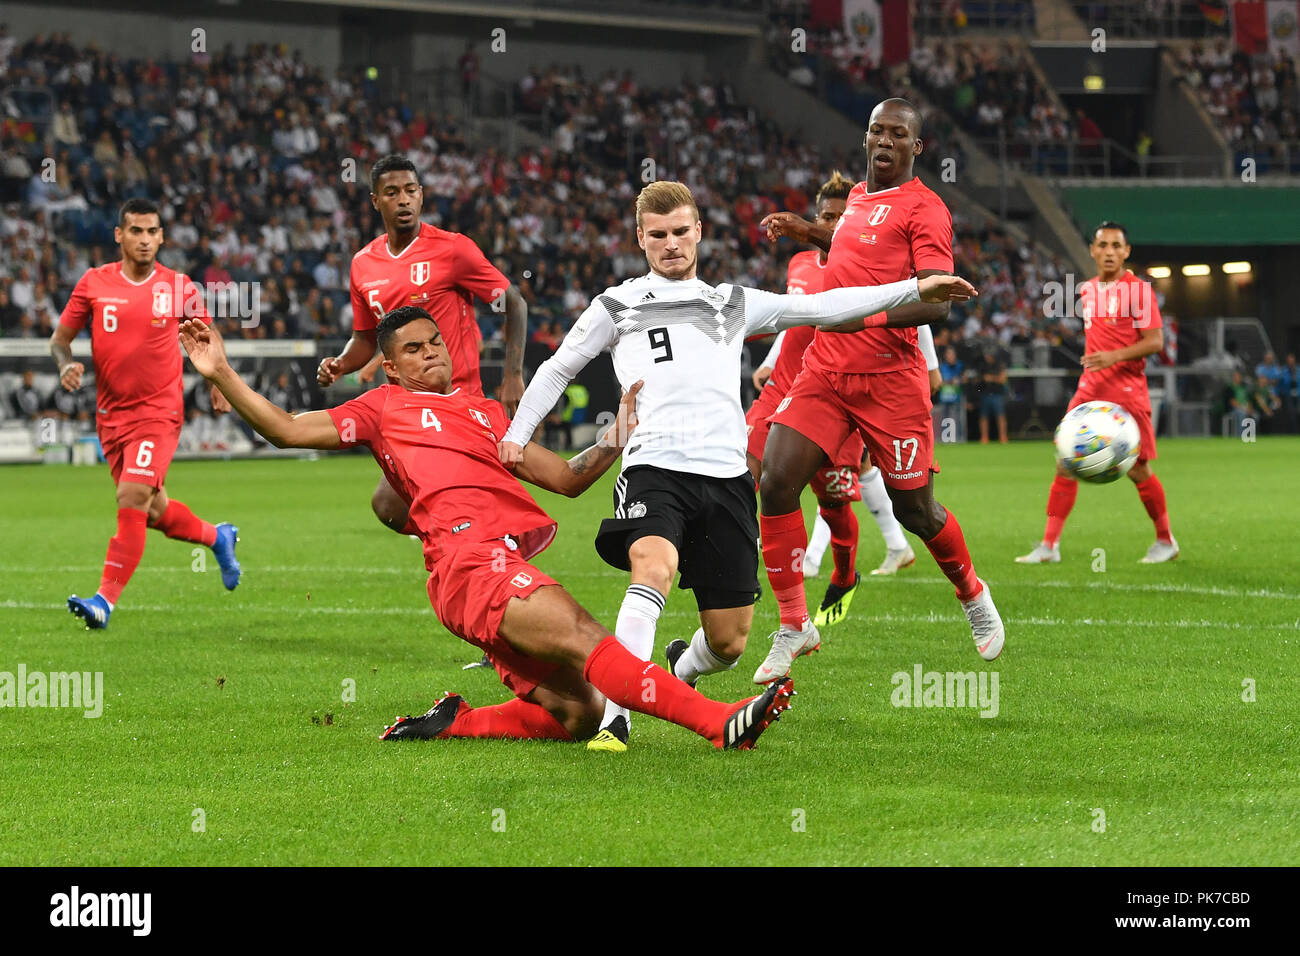 Timo WERNER (GER), action, duels versus Anderson SANTAMARIA (PER). Soccer Laenderspiel, Germany (GER) -Peru (PER) 2-1 on 09/09/2018 in Sinsheim/Wirsol Rhein-Neckar-Arena. DFB REGULATIONS PROHIBIT ANY USE OF PHOTOGRAPH AS IMAGE SEQUENCES AND/OR QUASI VIDEO. | usage worldwide Stock Photo